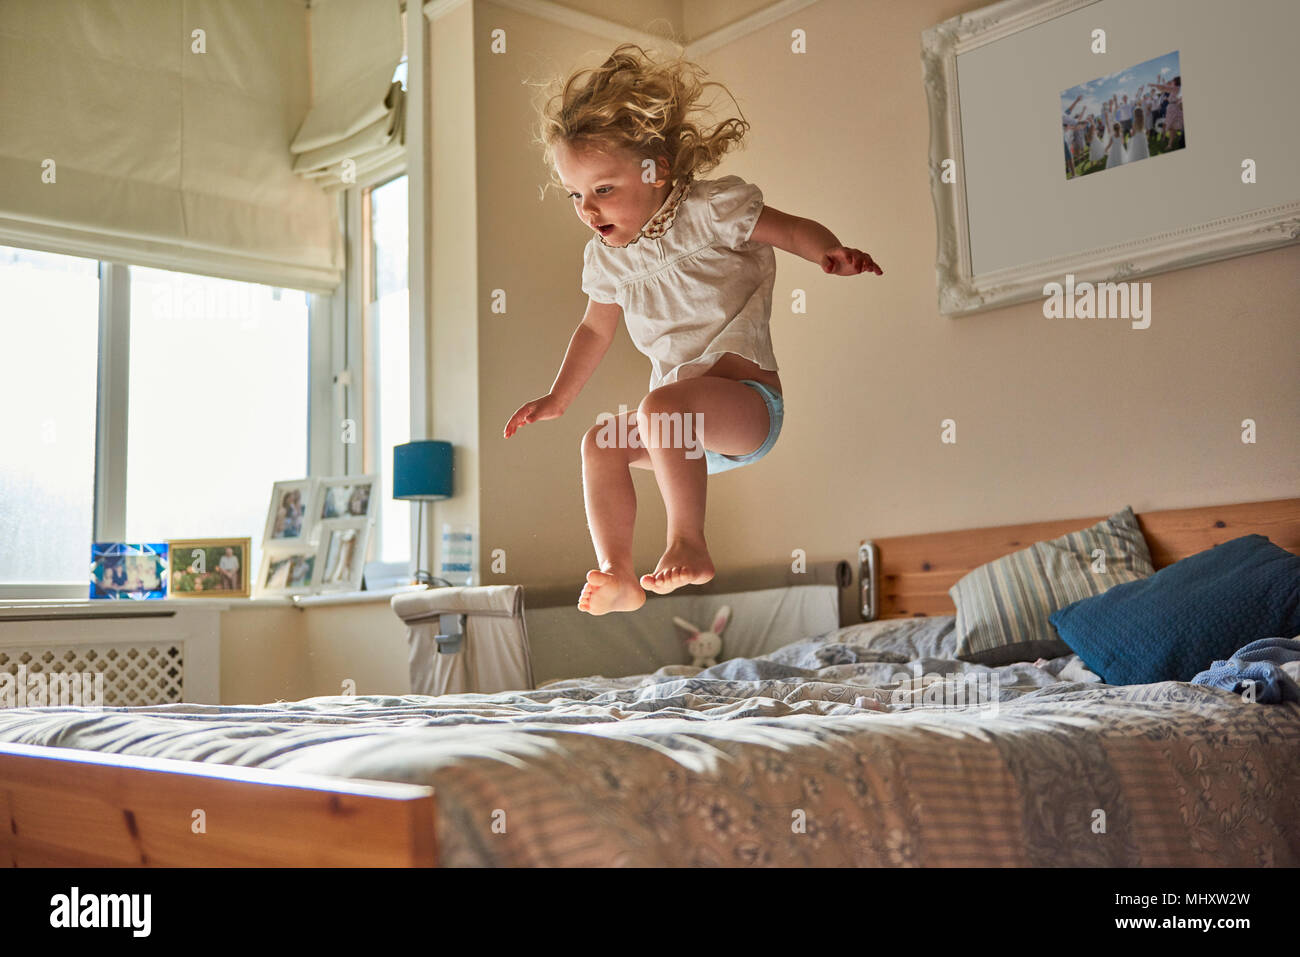 Female toddler jumping mid air on bed Stock Photo